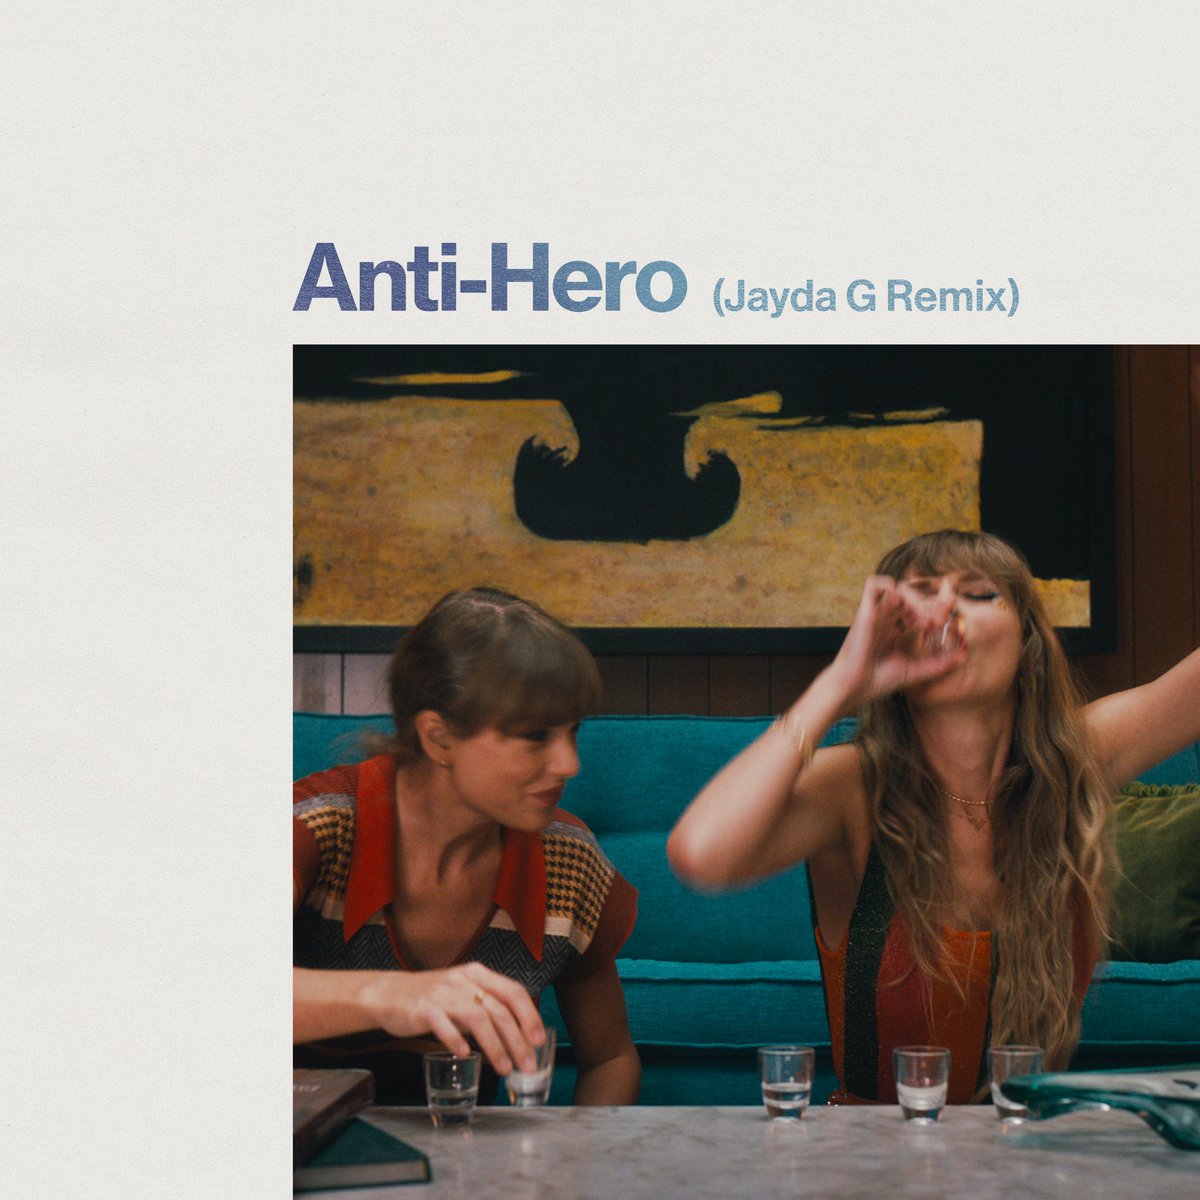 Take your self loathing to the dancefloor! 2 more Anti Hero remixes available on my site until 10pm ET tonight 🙃

https://t.co/WdrCmvMfo8 